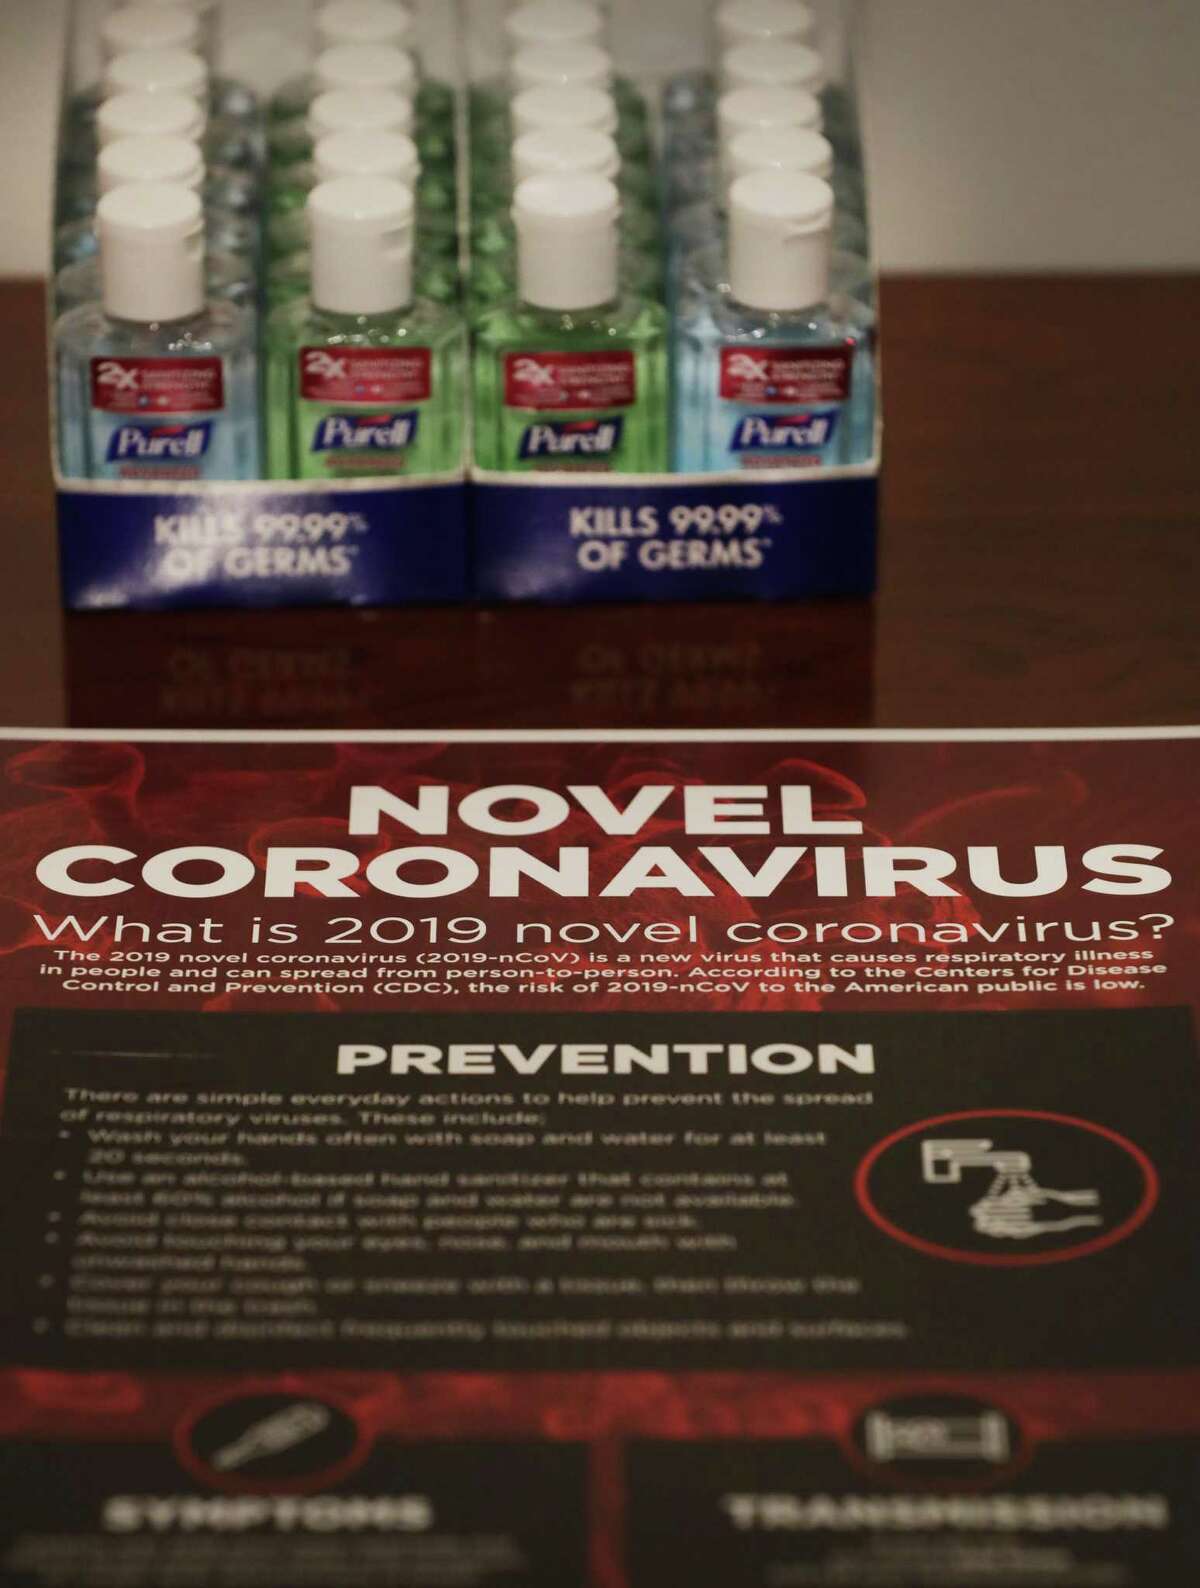 Small bottles of hand sanitizer and information about the novel coronavirus are displayed at a news conference where San Antonio officials answered questions about the coronavirus and the evacuees from a cruise ship who are under quarantine at Joint Base San Antonio-Lackland.